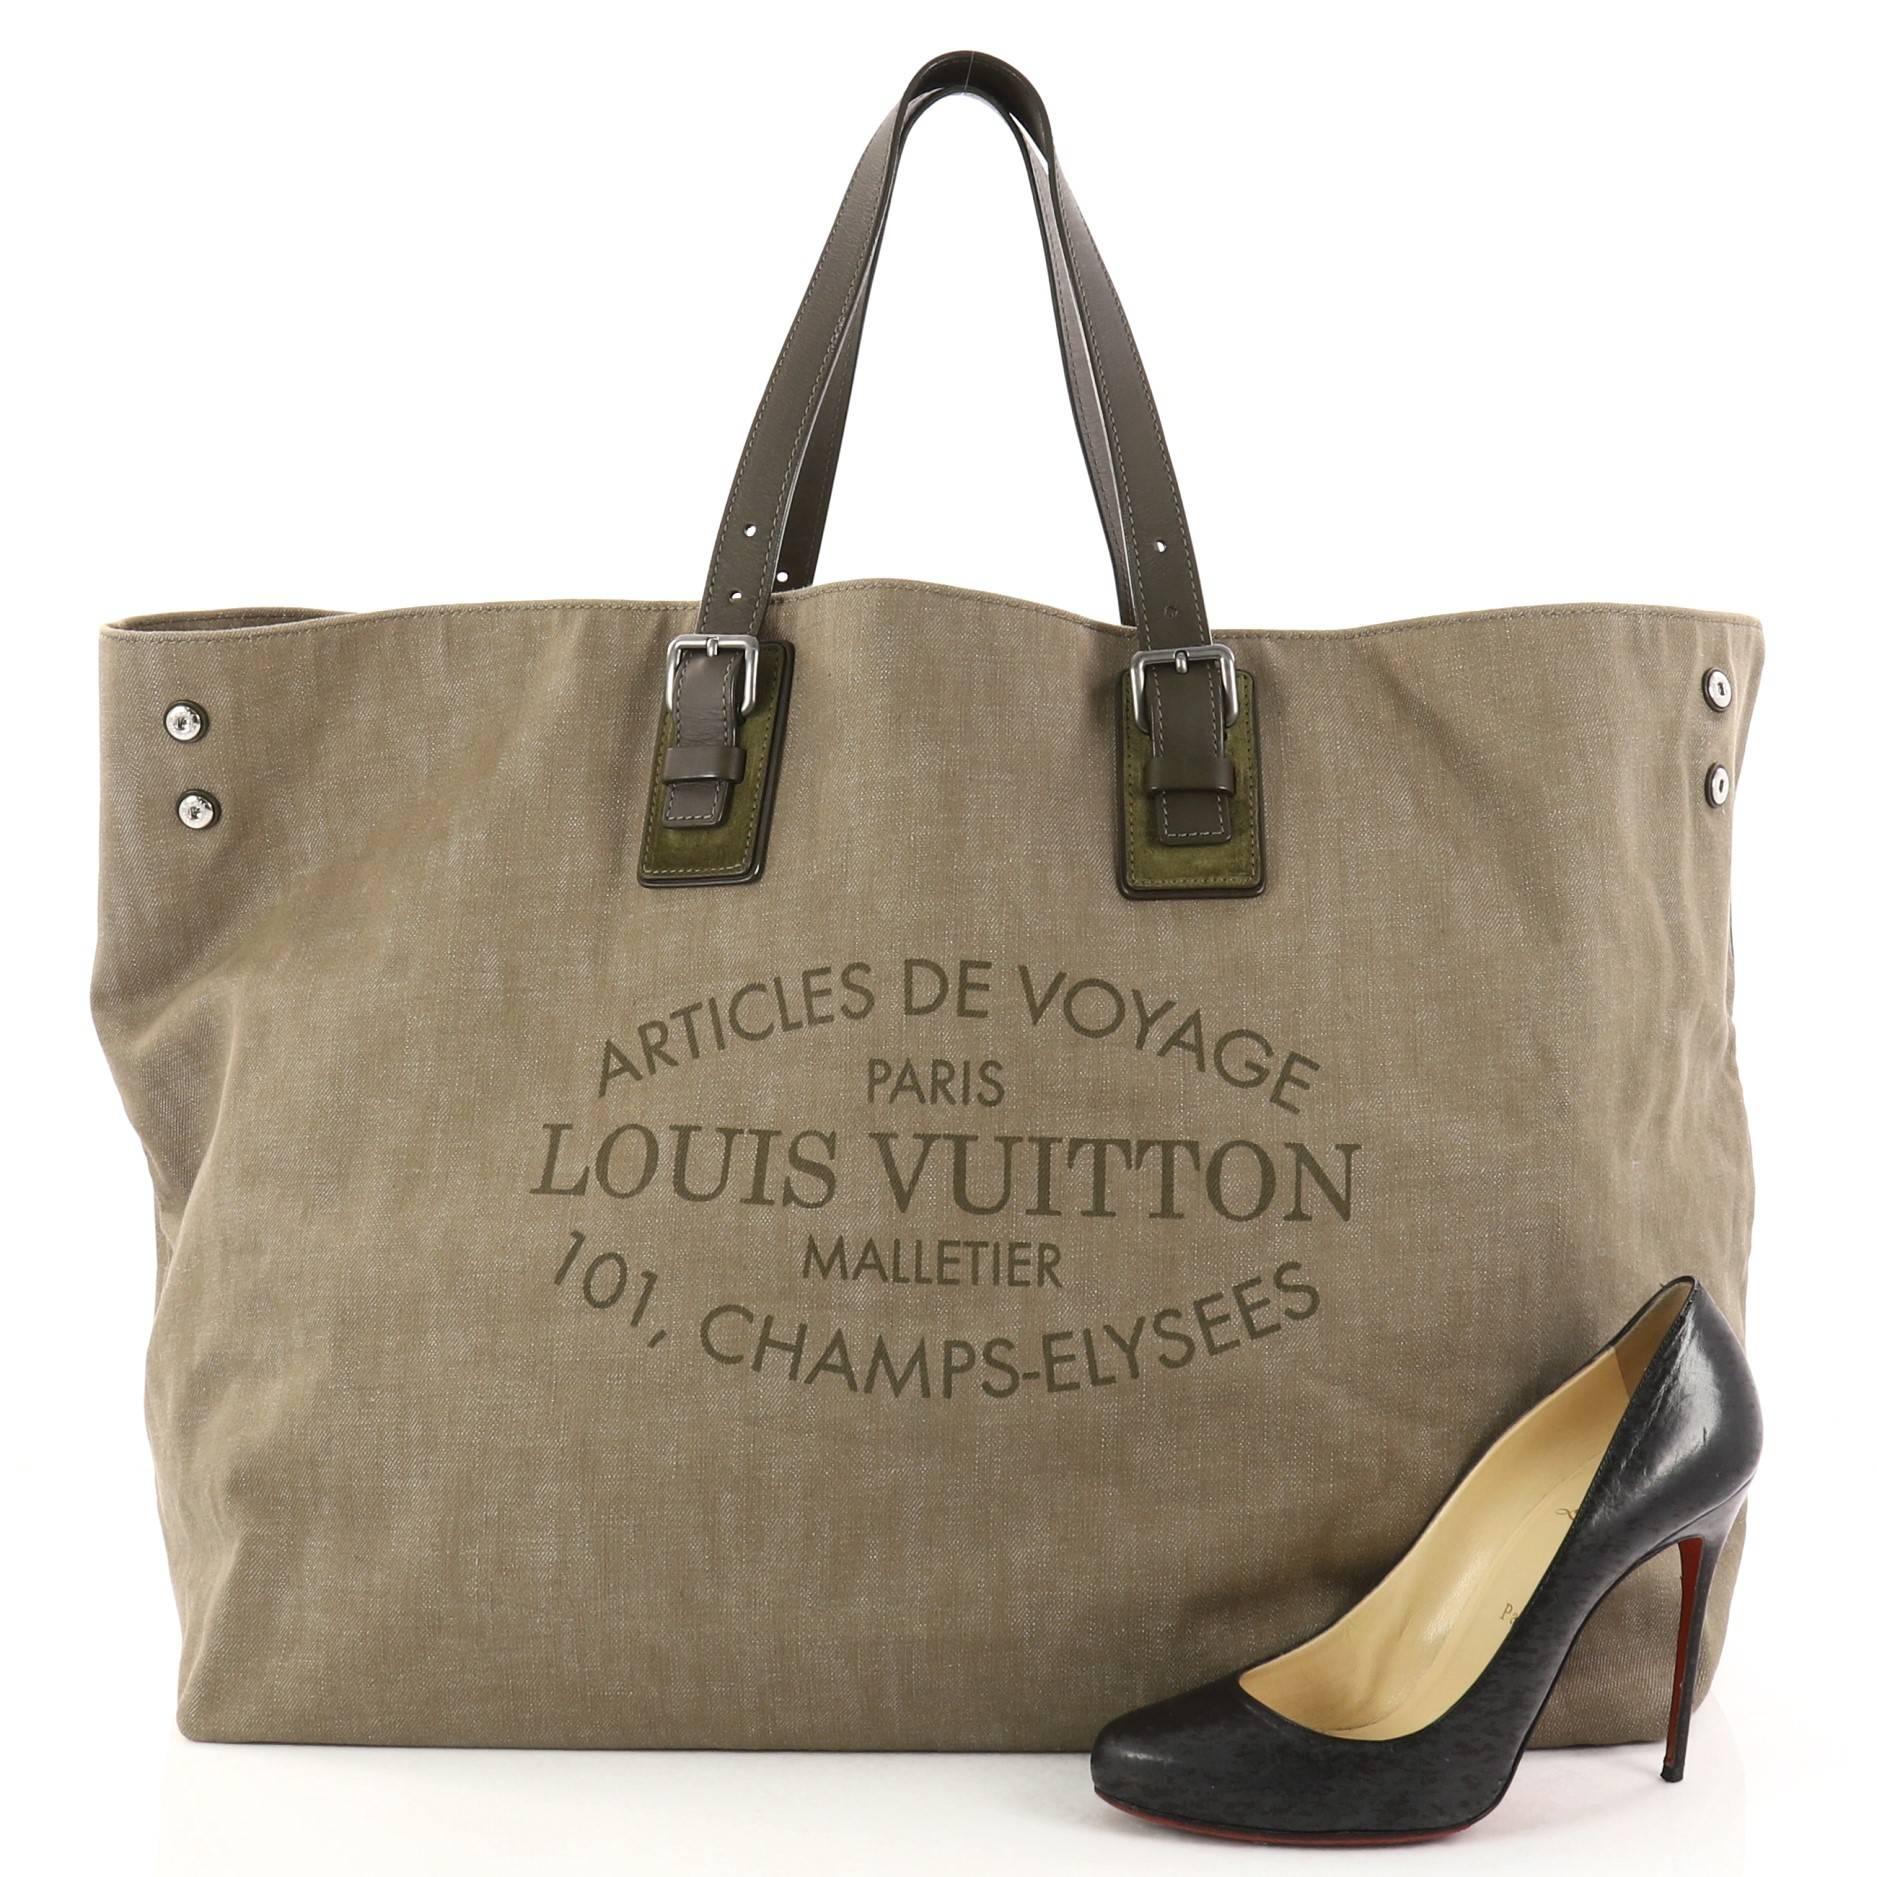 This authentic Louis Vuitton Limited Edition Articles de Voyage Cabas Denim XL is the perfect bag for your light travels. Crafted in brownish green denim with voyage lettering, this tote features adjustable dual leather handles, side snap buttons,